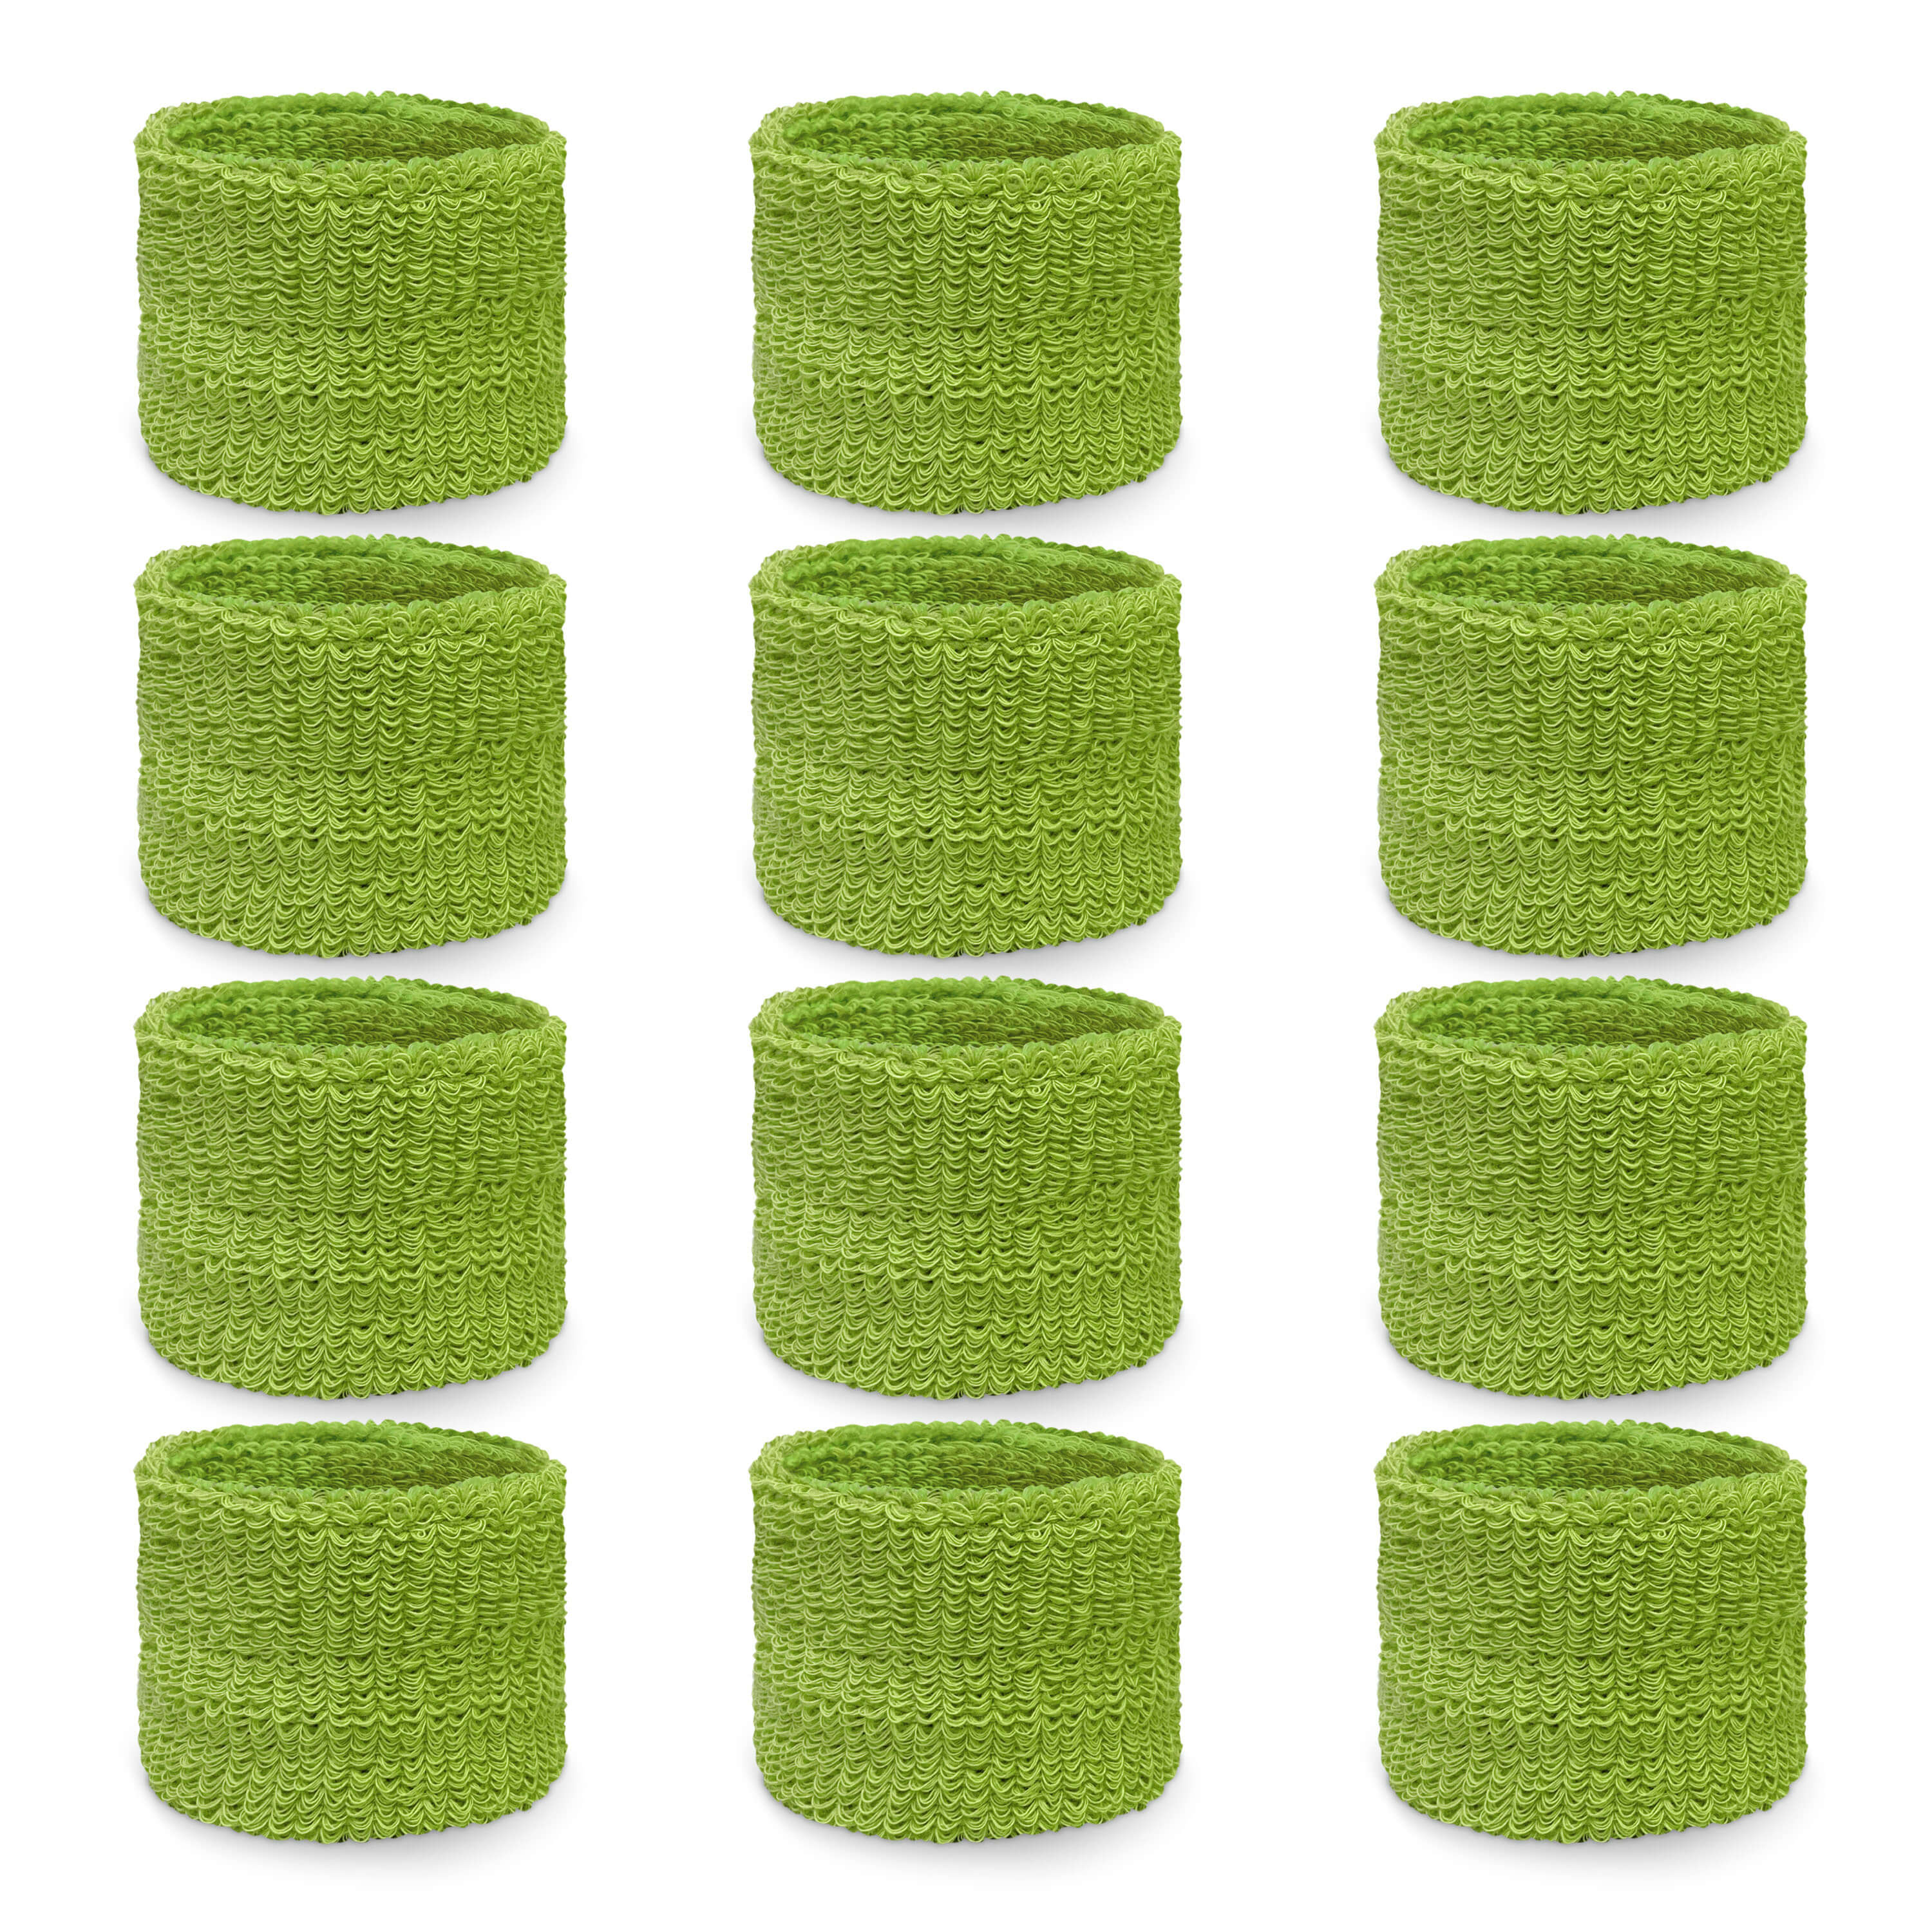 Lime green youth terry wristbands wholesale for schools [6pairs]